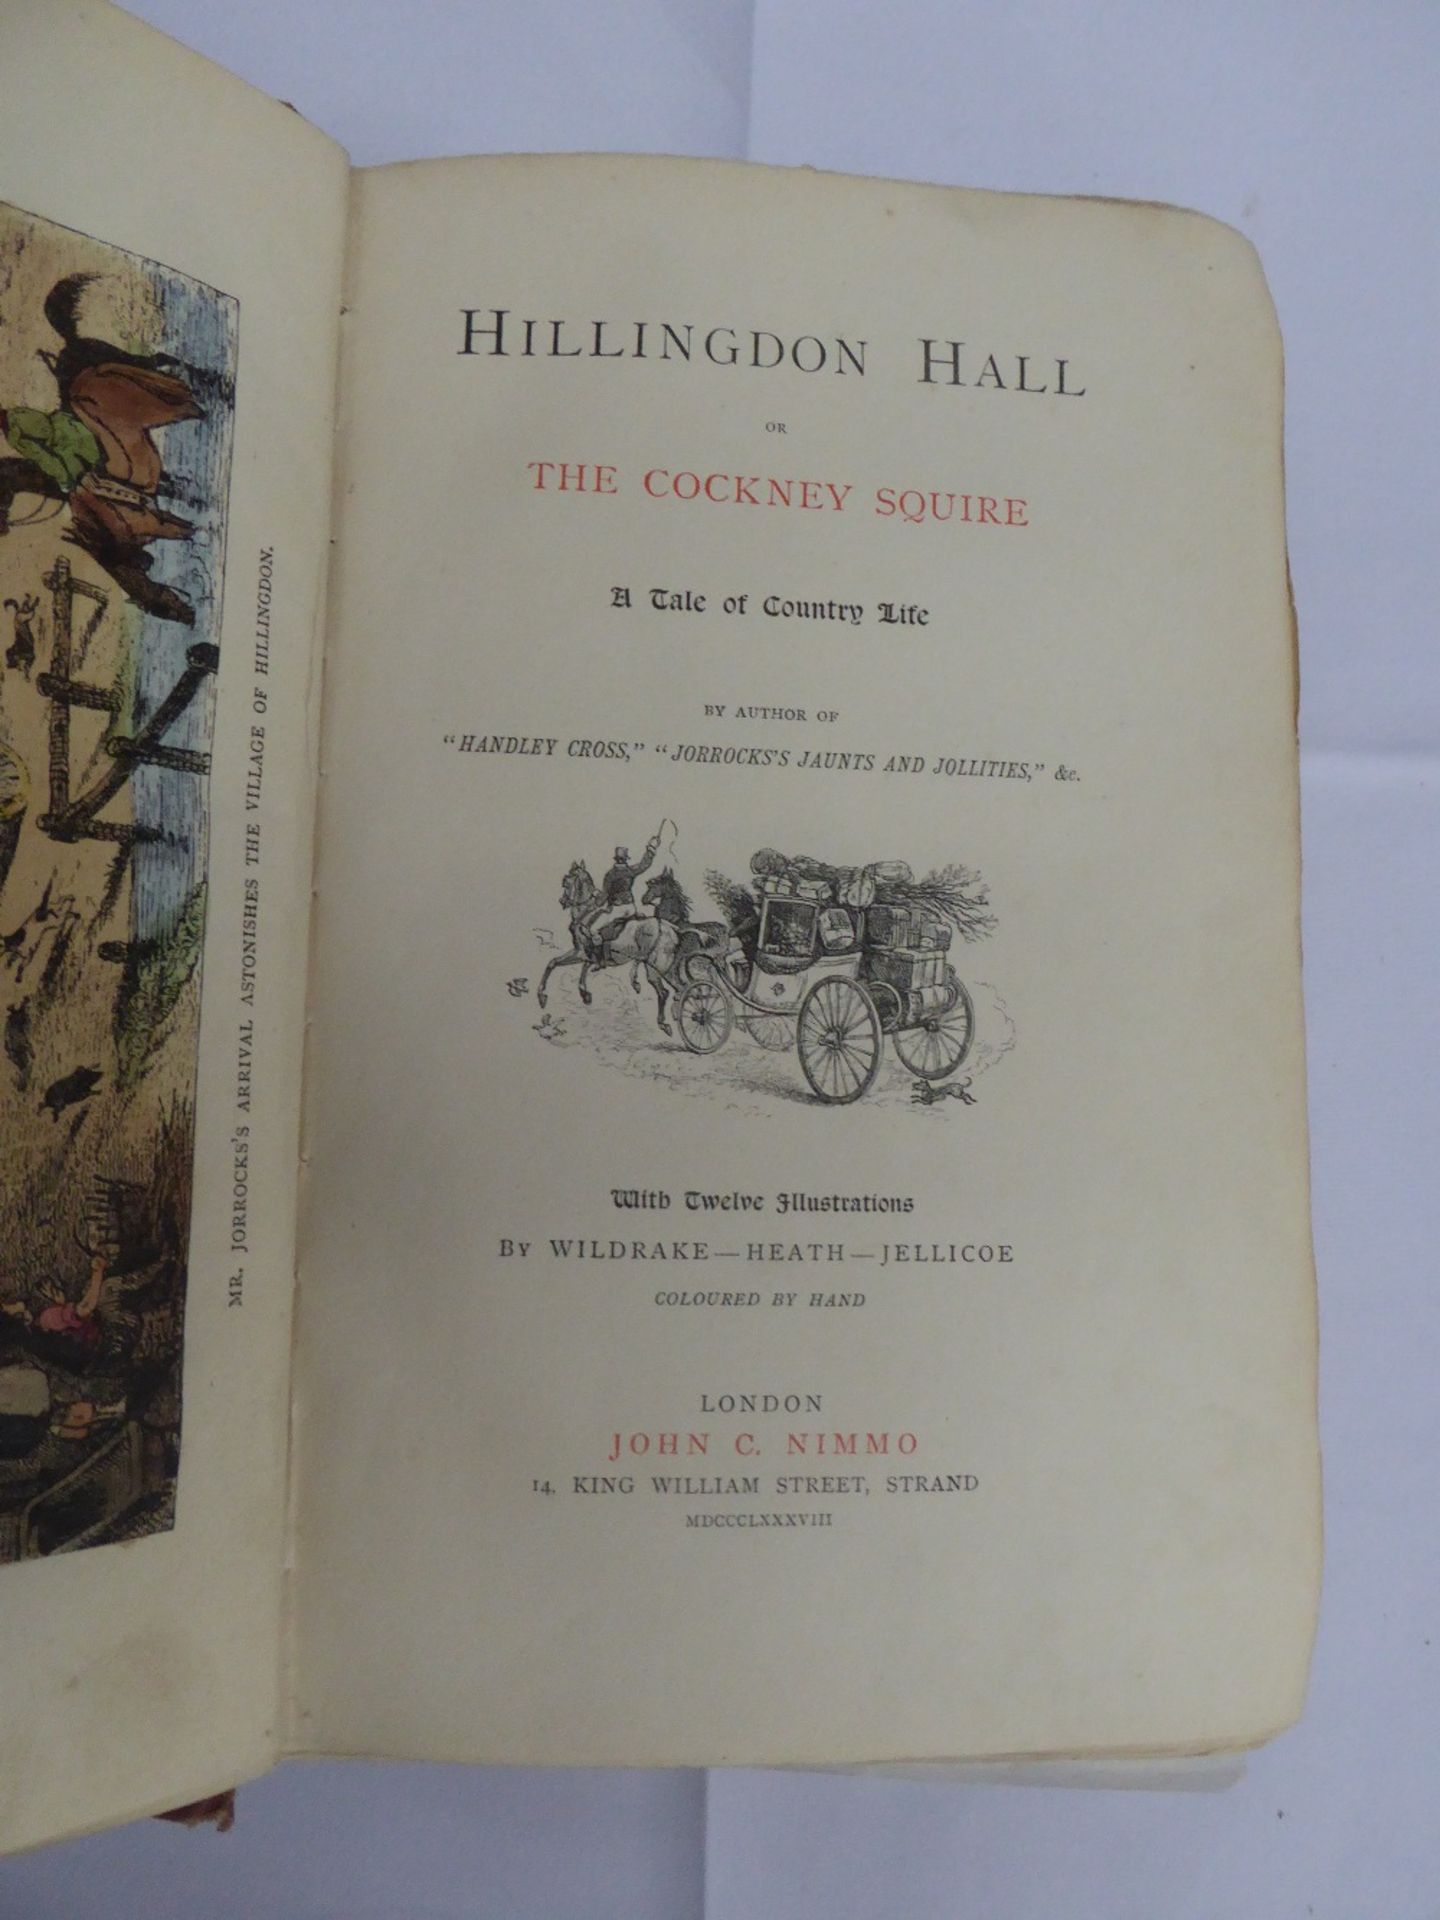 Hillingdon Hall or The Cockney Squire by Robert S. Surtees, 1888.